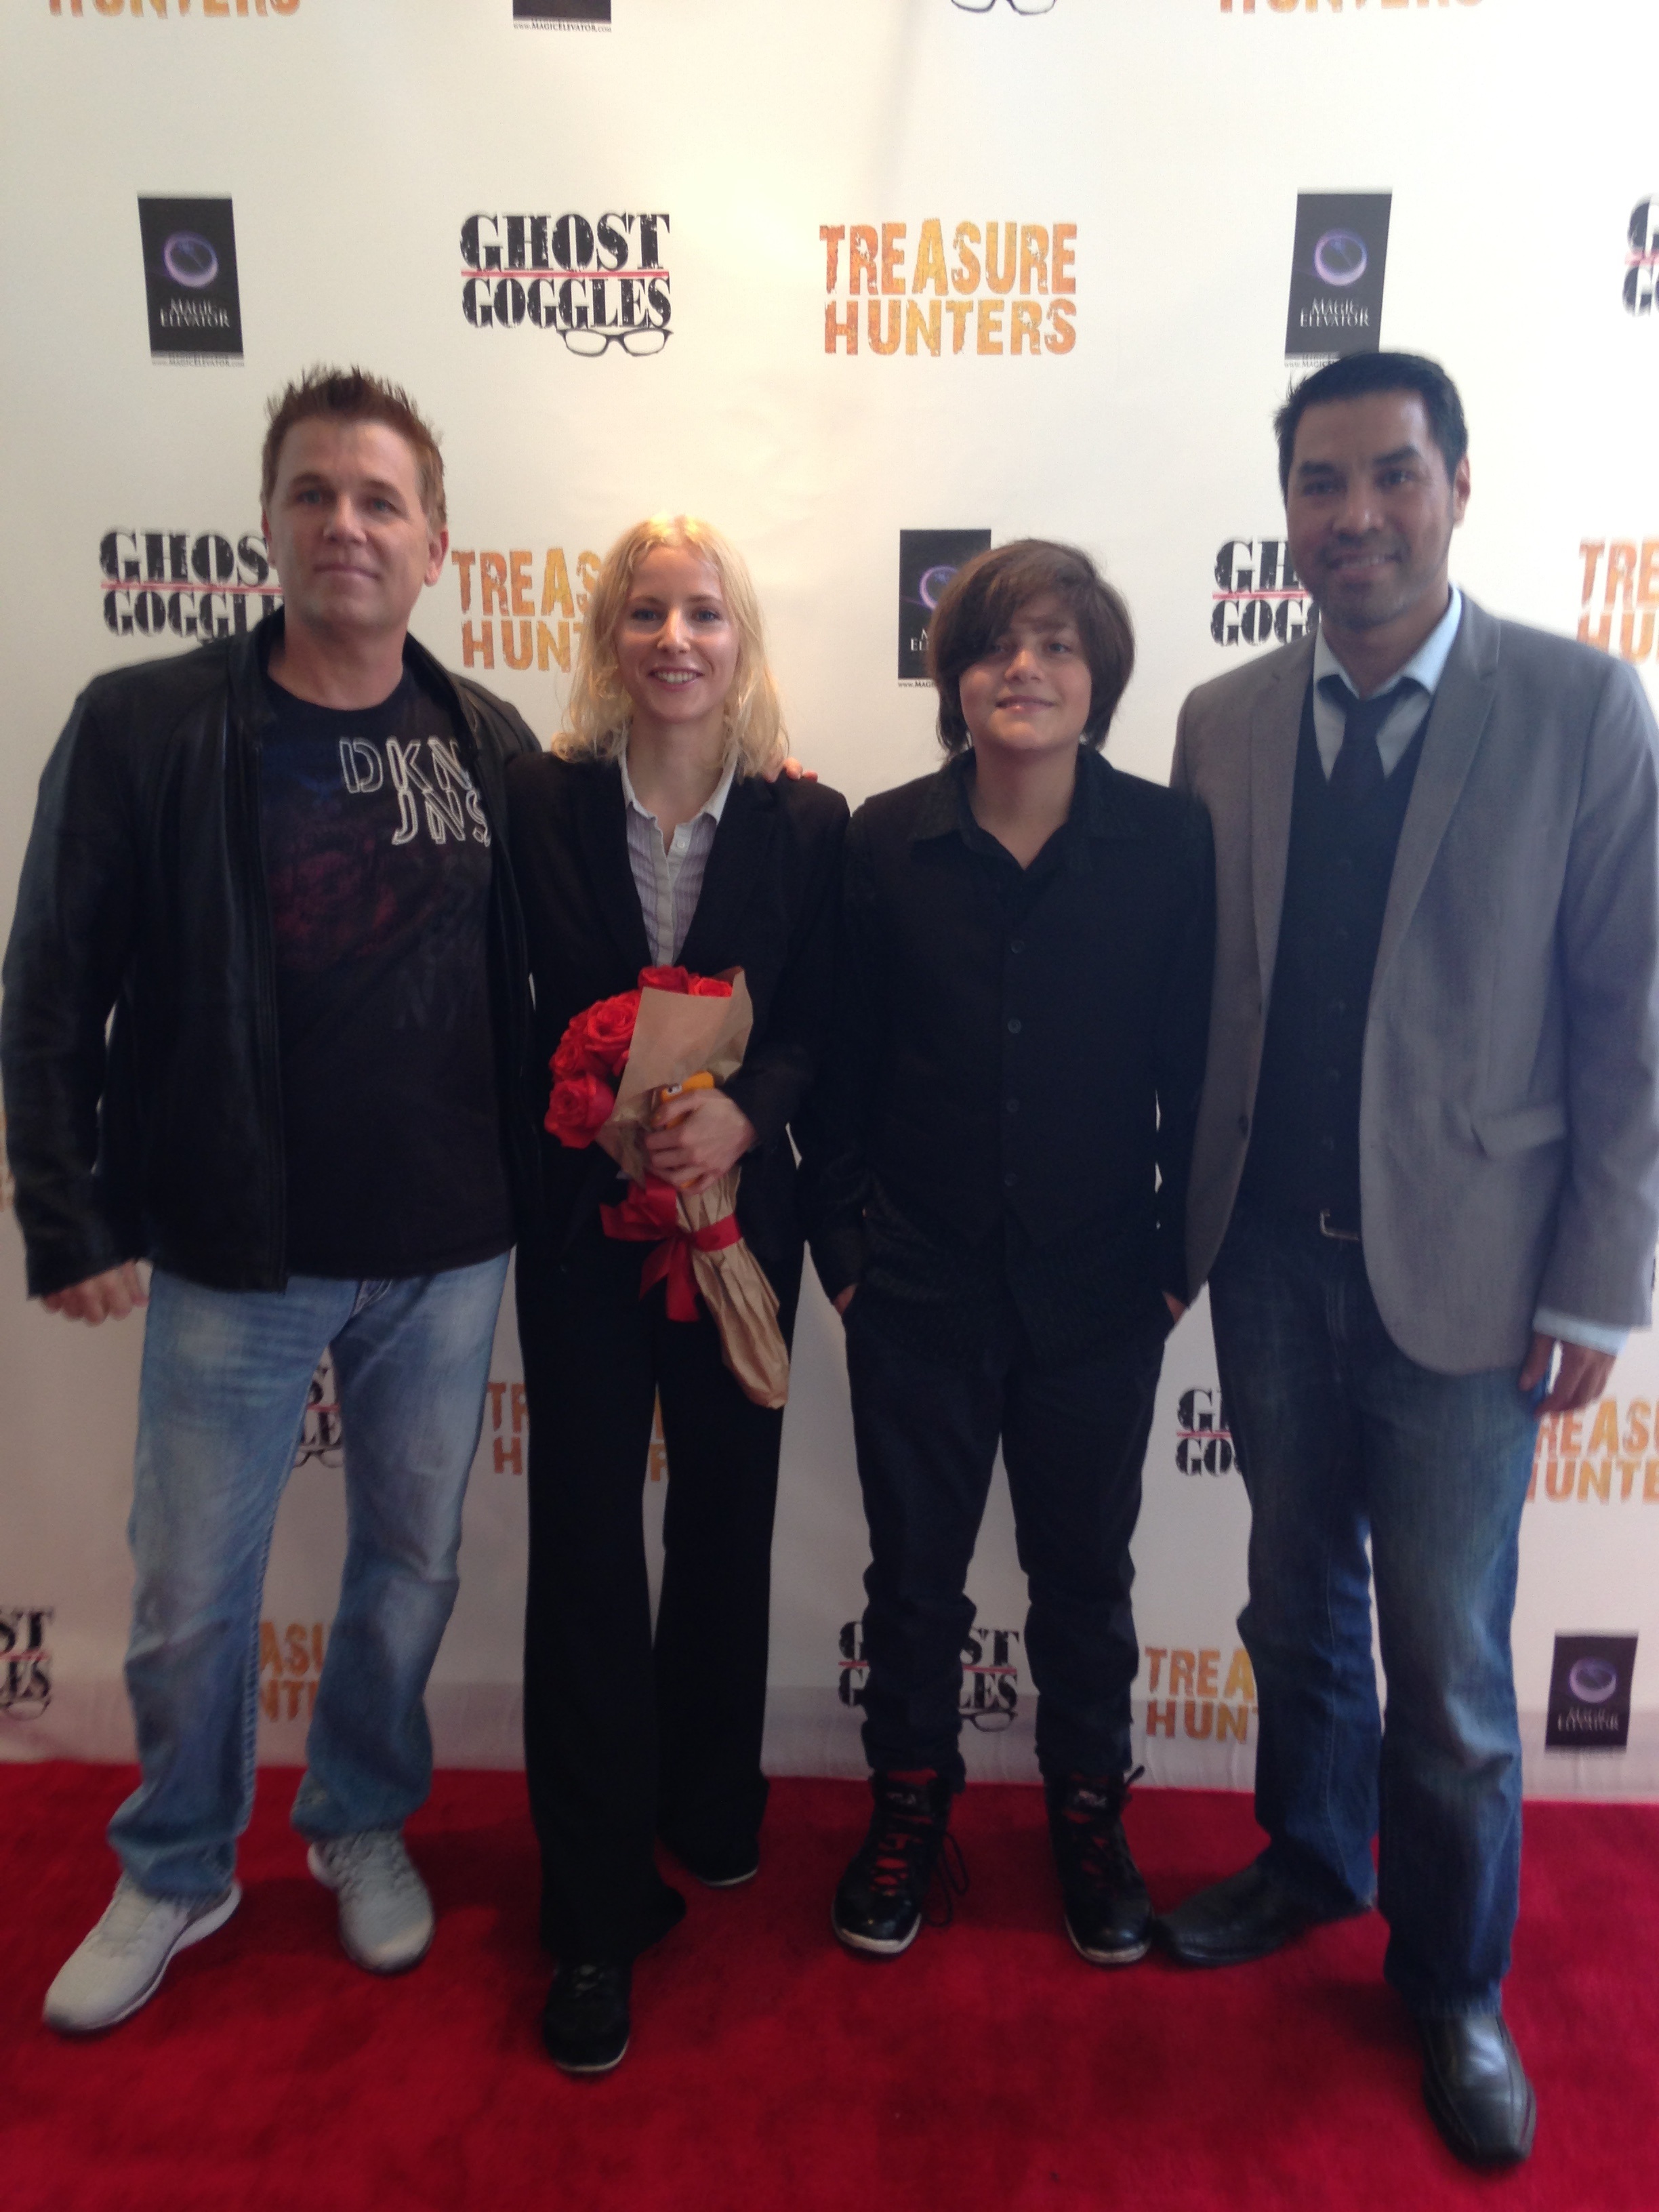 Billy Mikus, Berenika Maciejewicz, Andre Kennedy & Jeff Solema on the red carpet release of Ghost Goggles